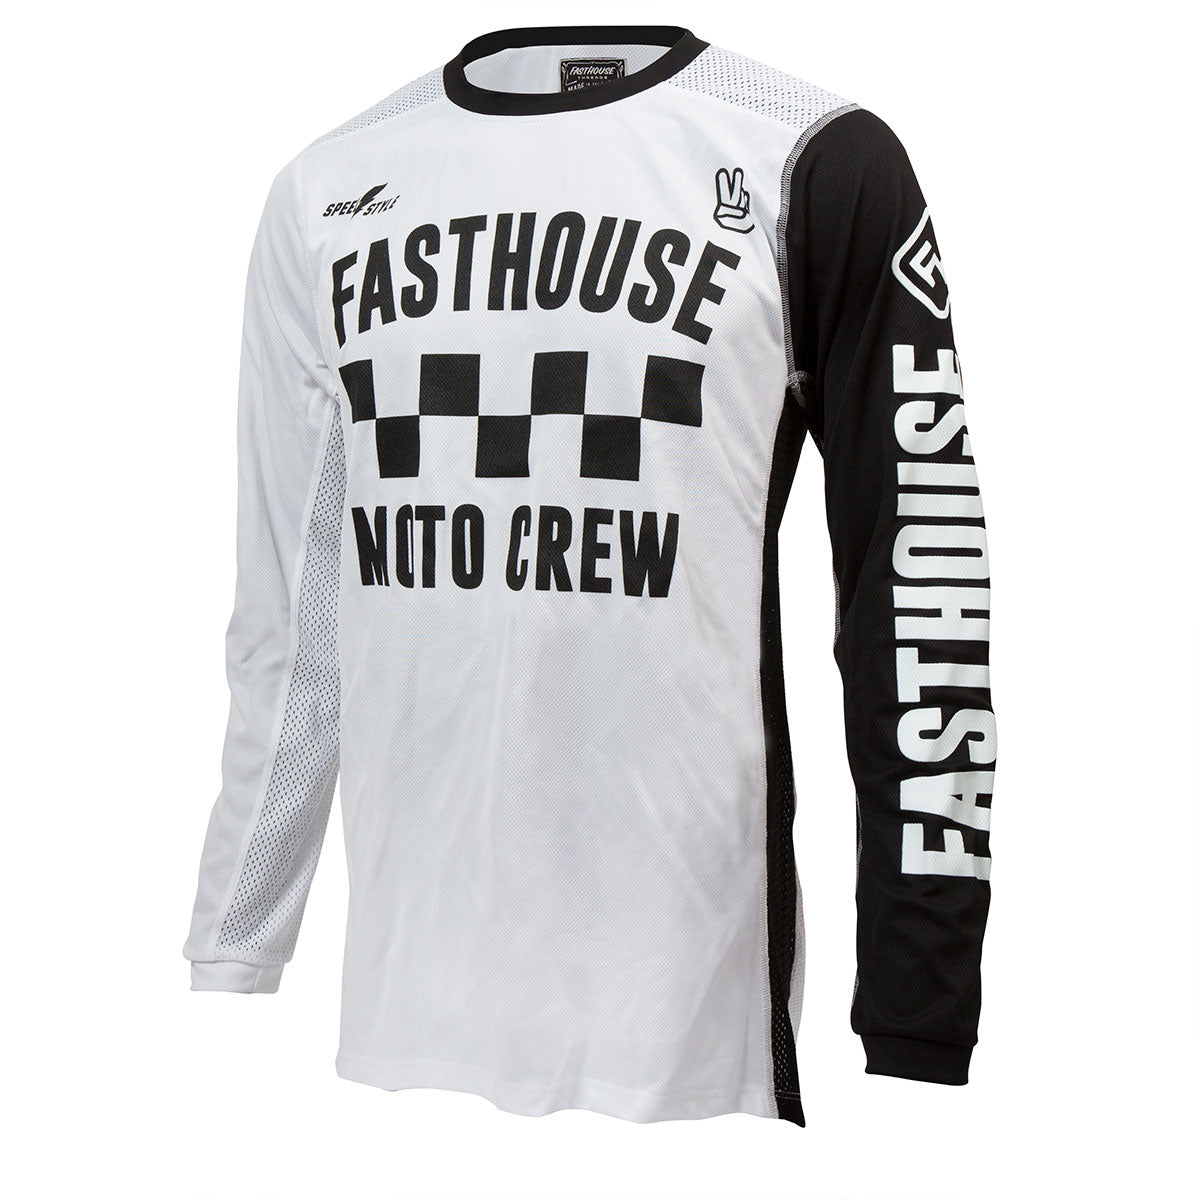 Fasthouse - Checkers Air-Cooled Jersey - White